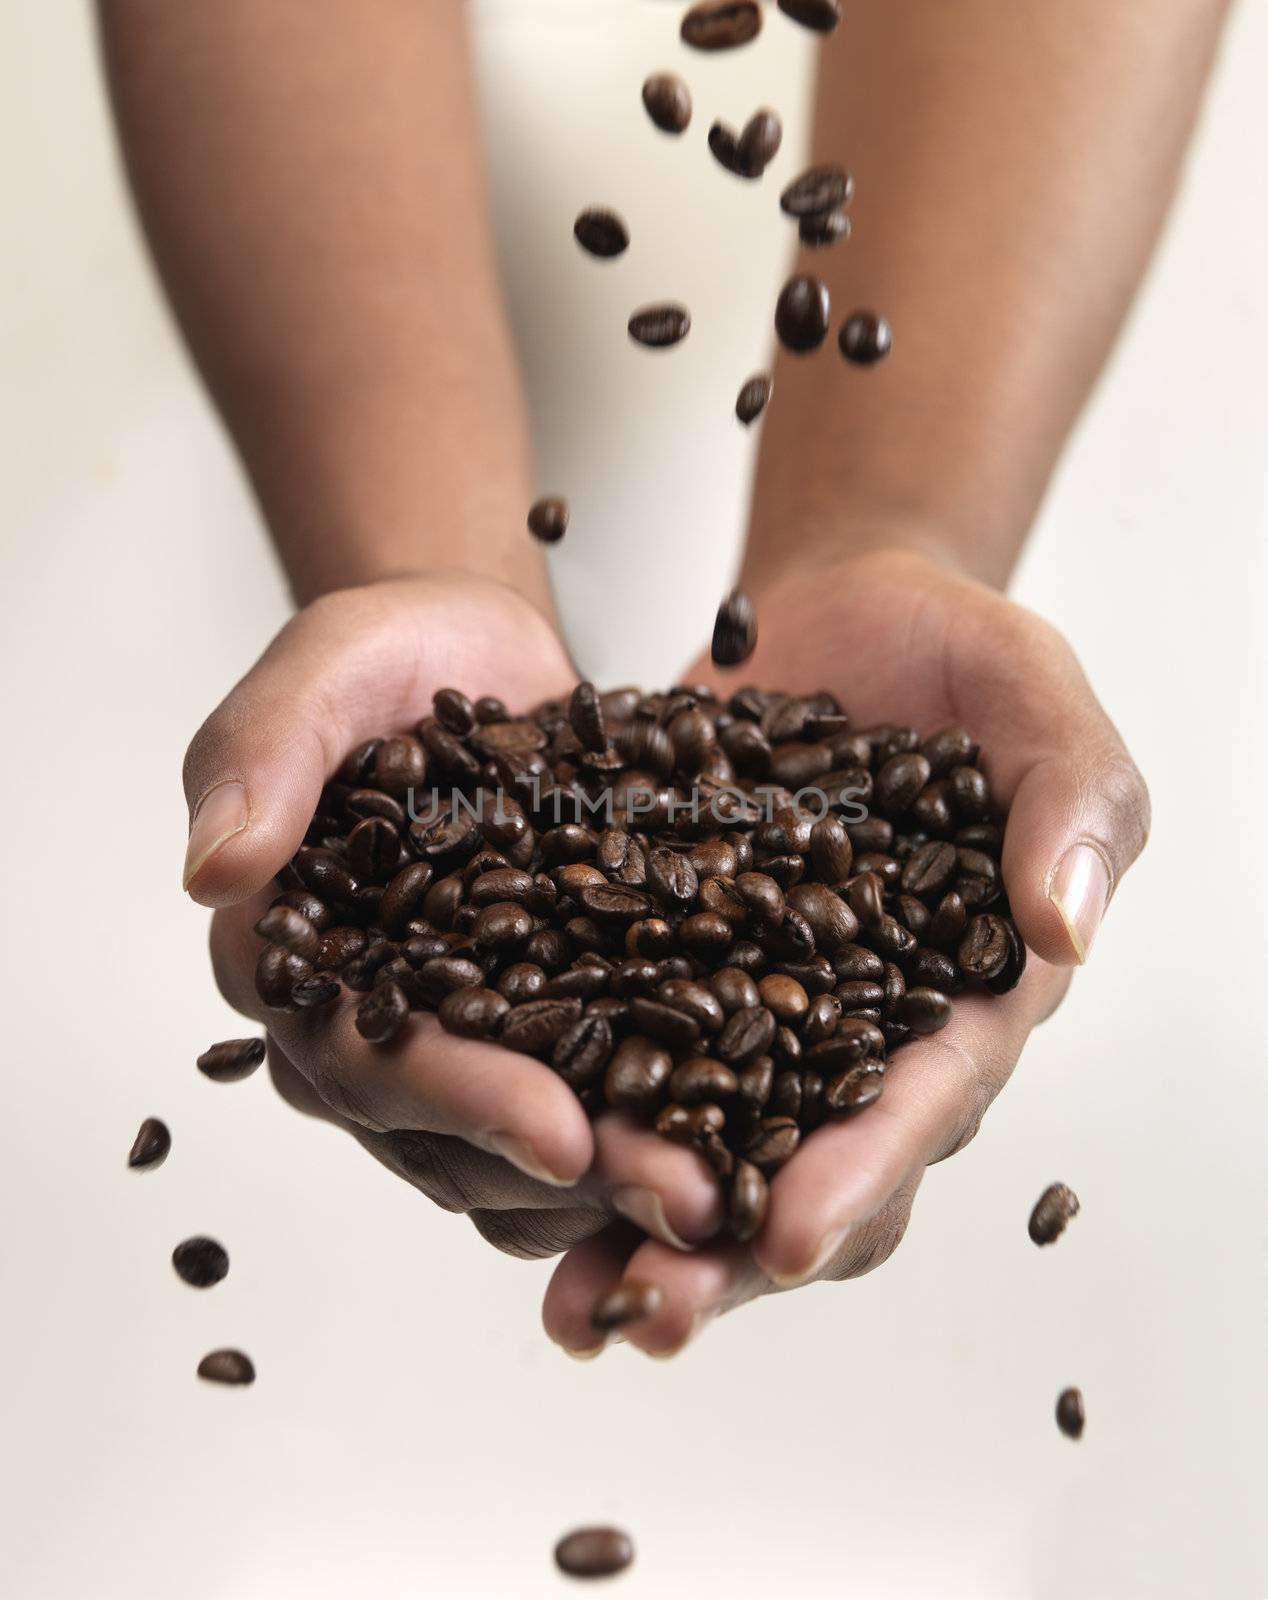 Hands holding Large group of Coffee beans